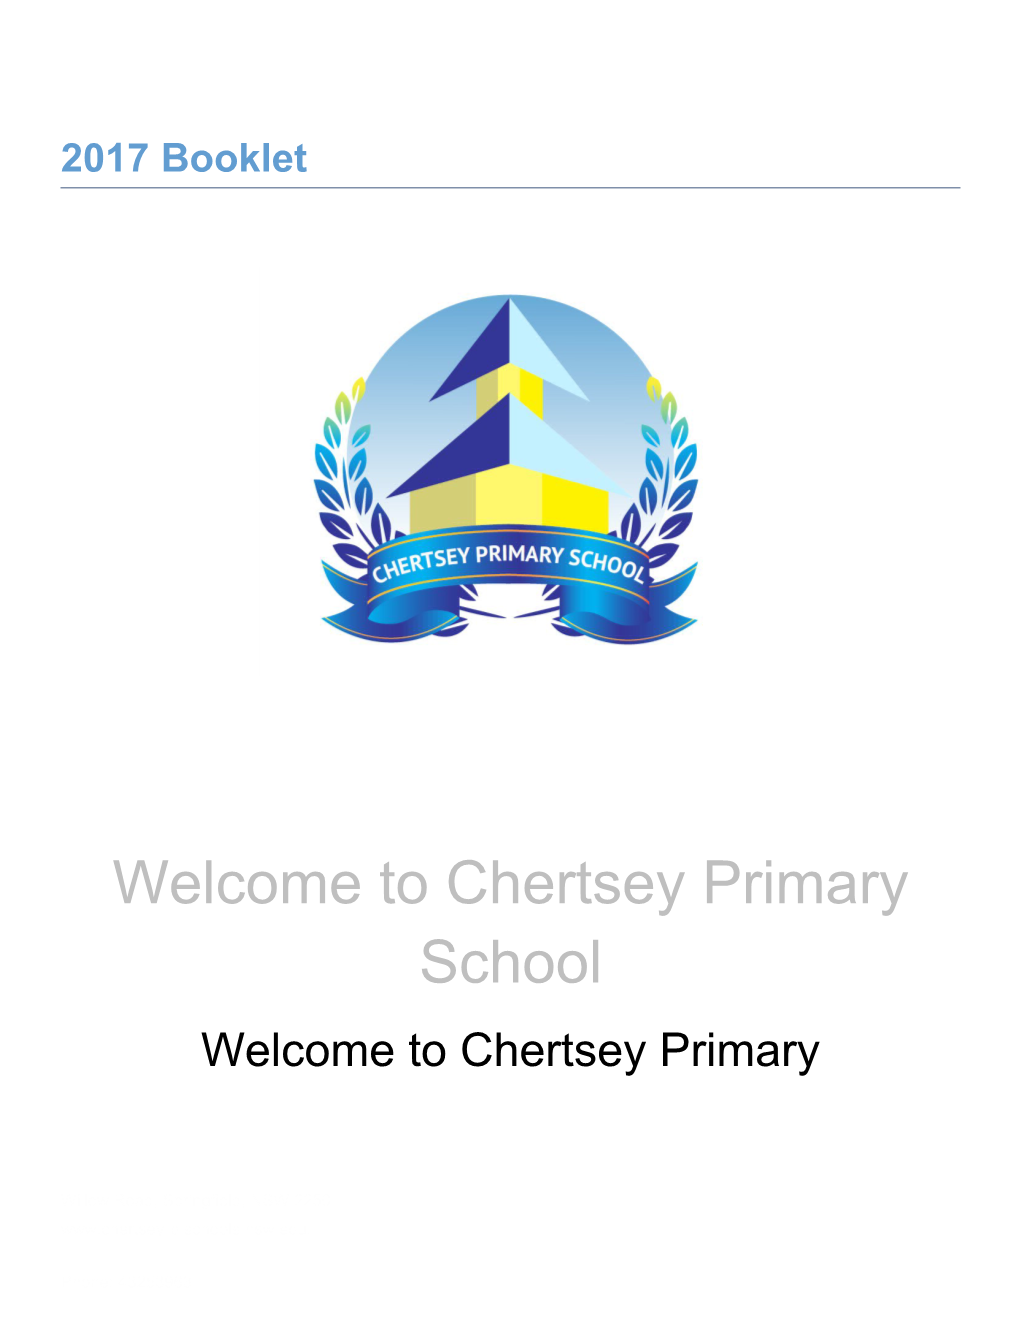 Welcome to Chertsey Primary School